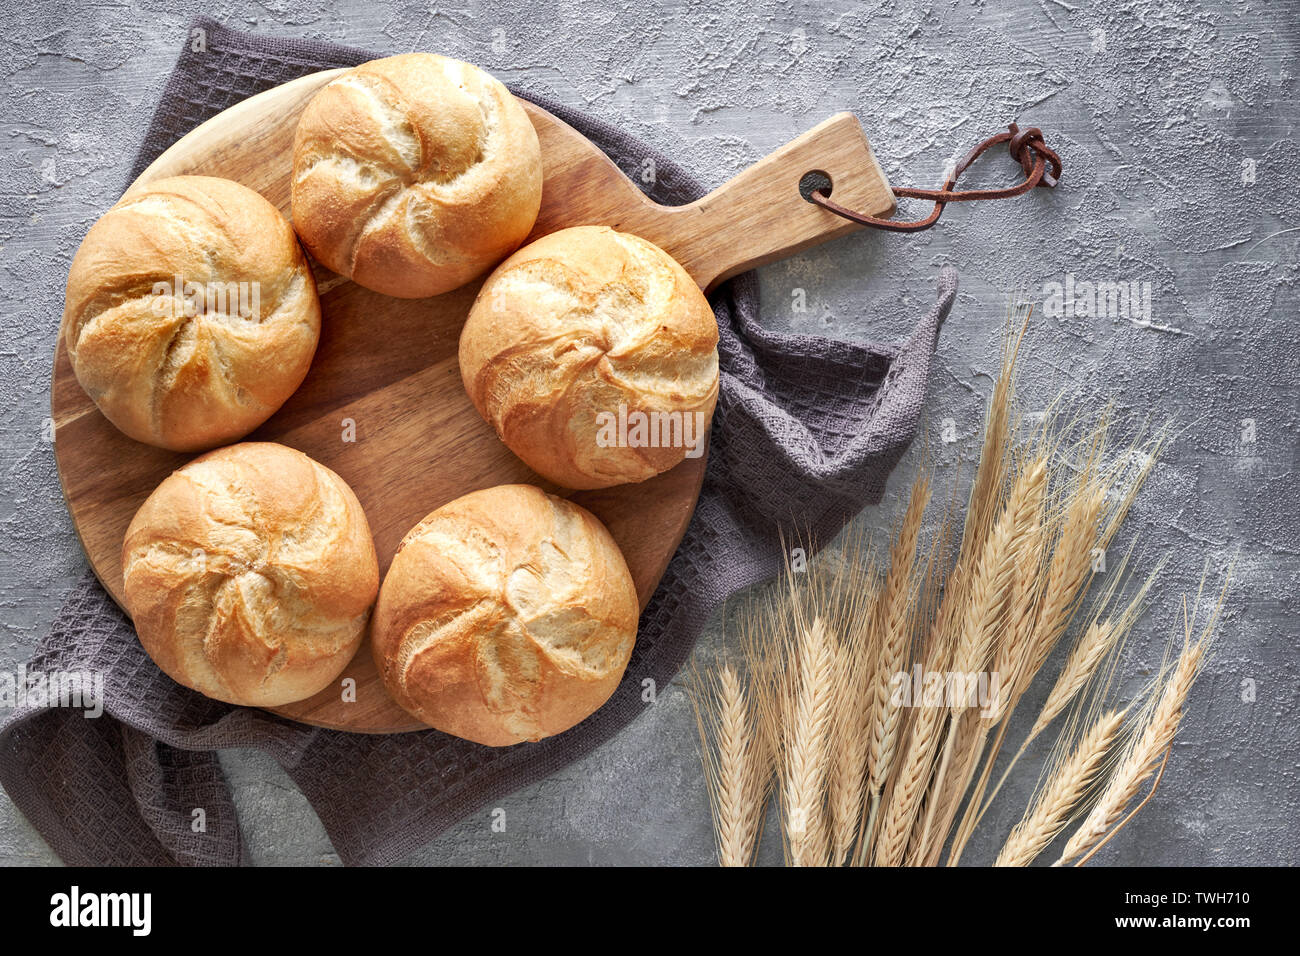 Vienna Roll High Resolution Stock Photography and Images - Alamy